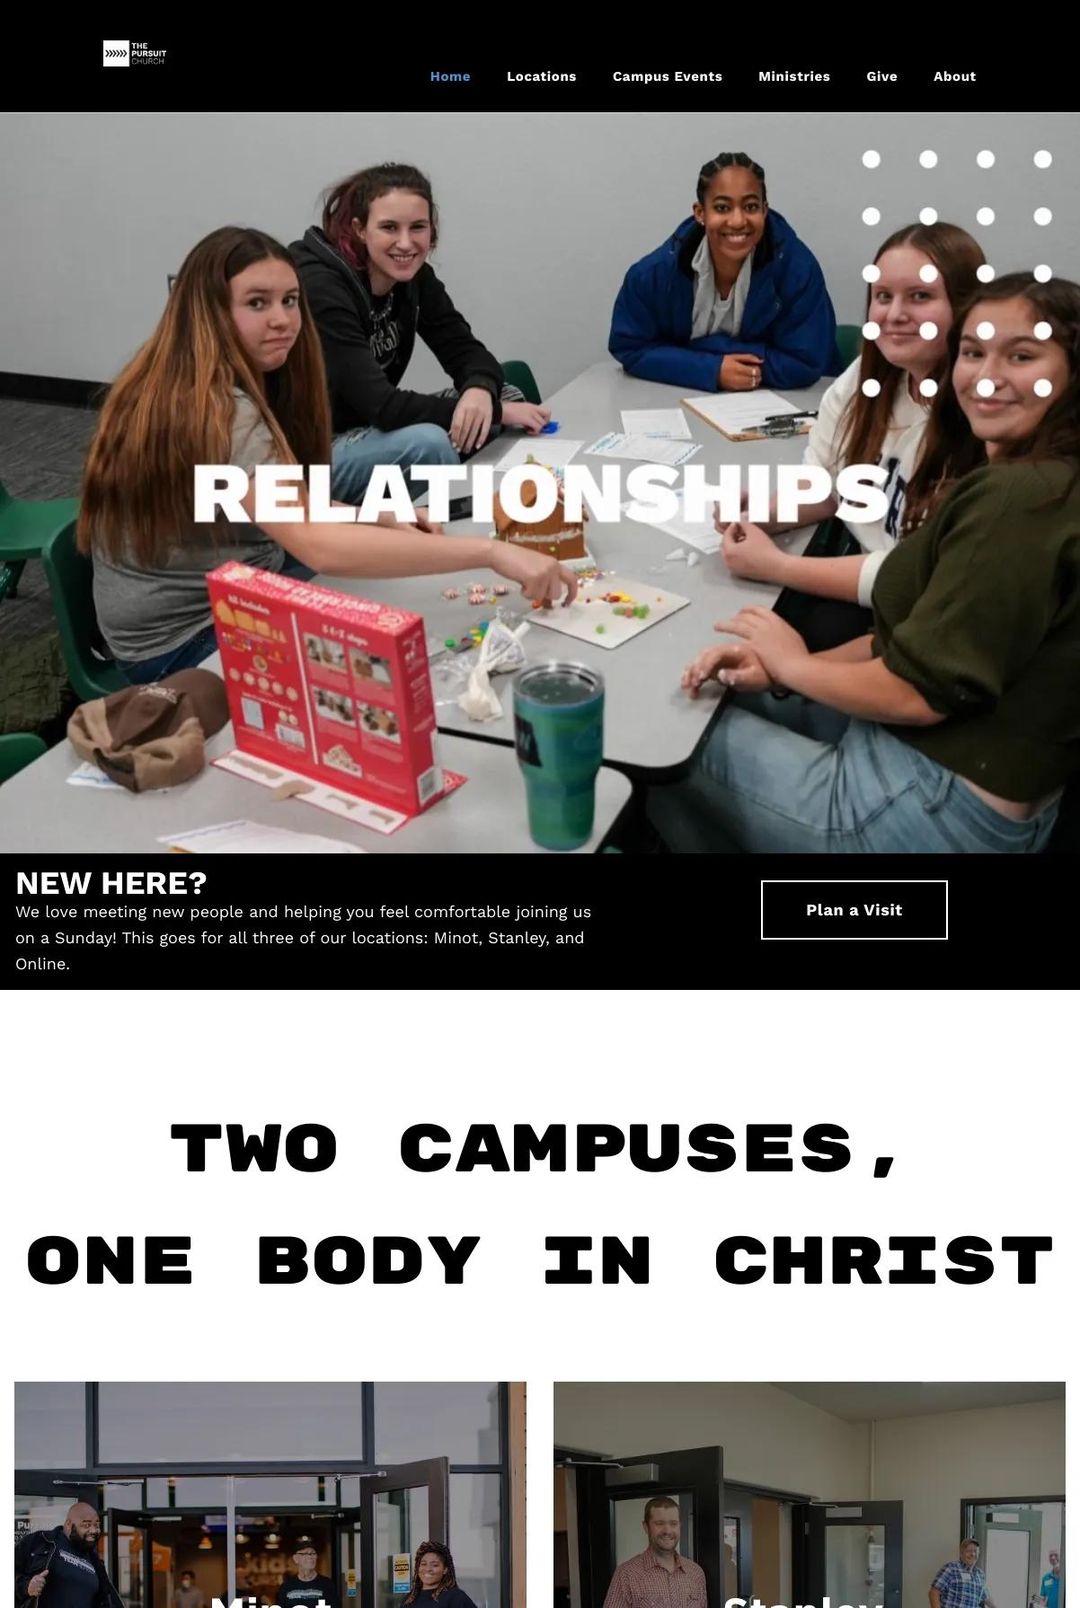 Screenshot 1 of The Pursuit Church (Example Squarespace Church Website)